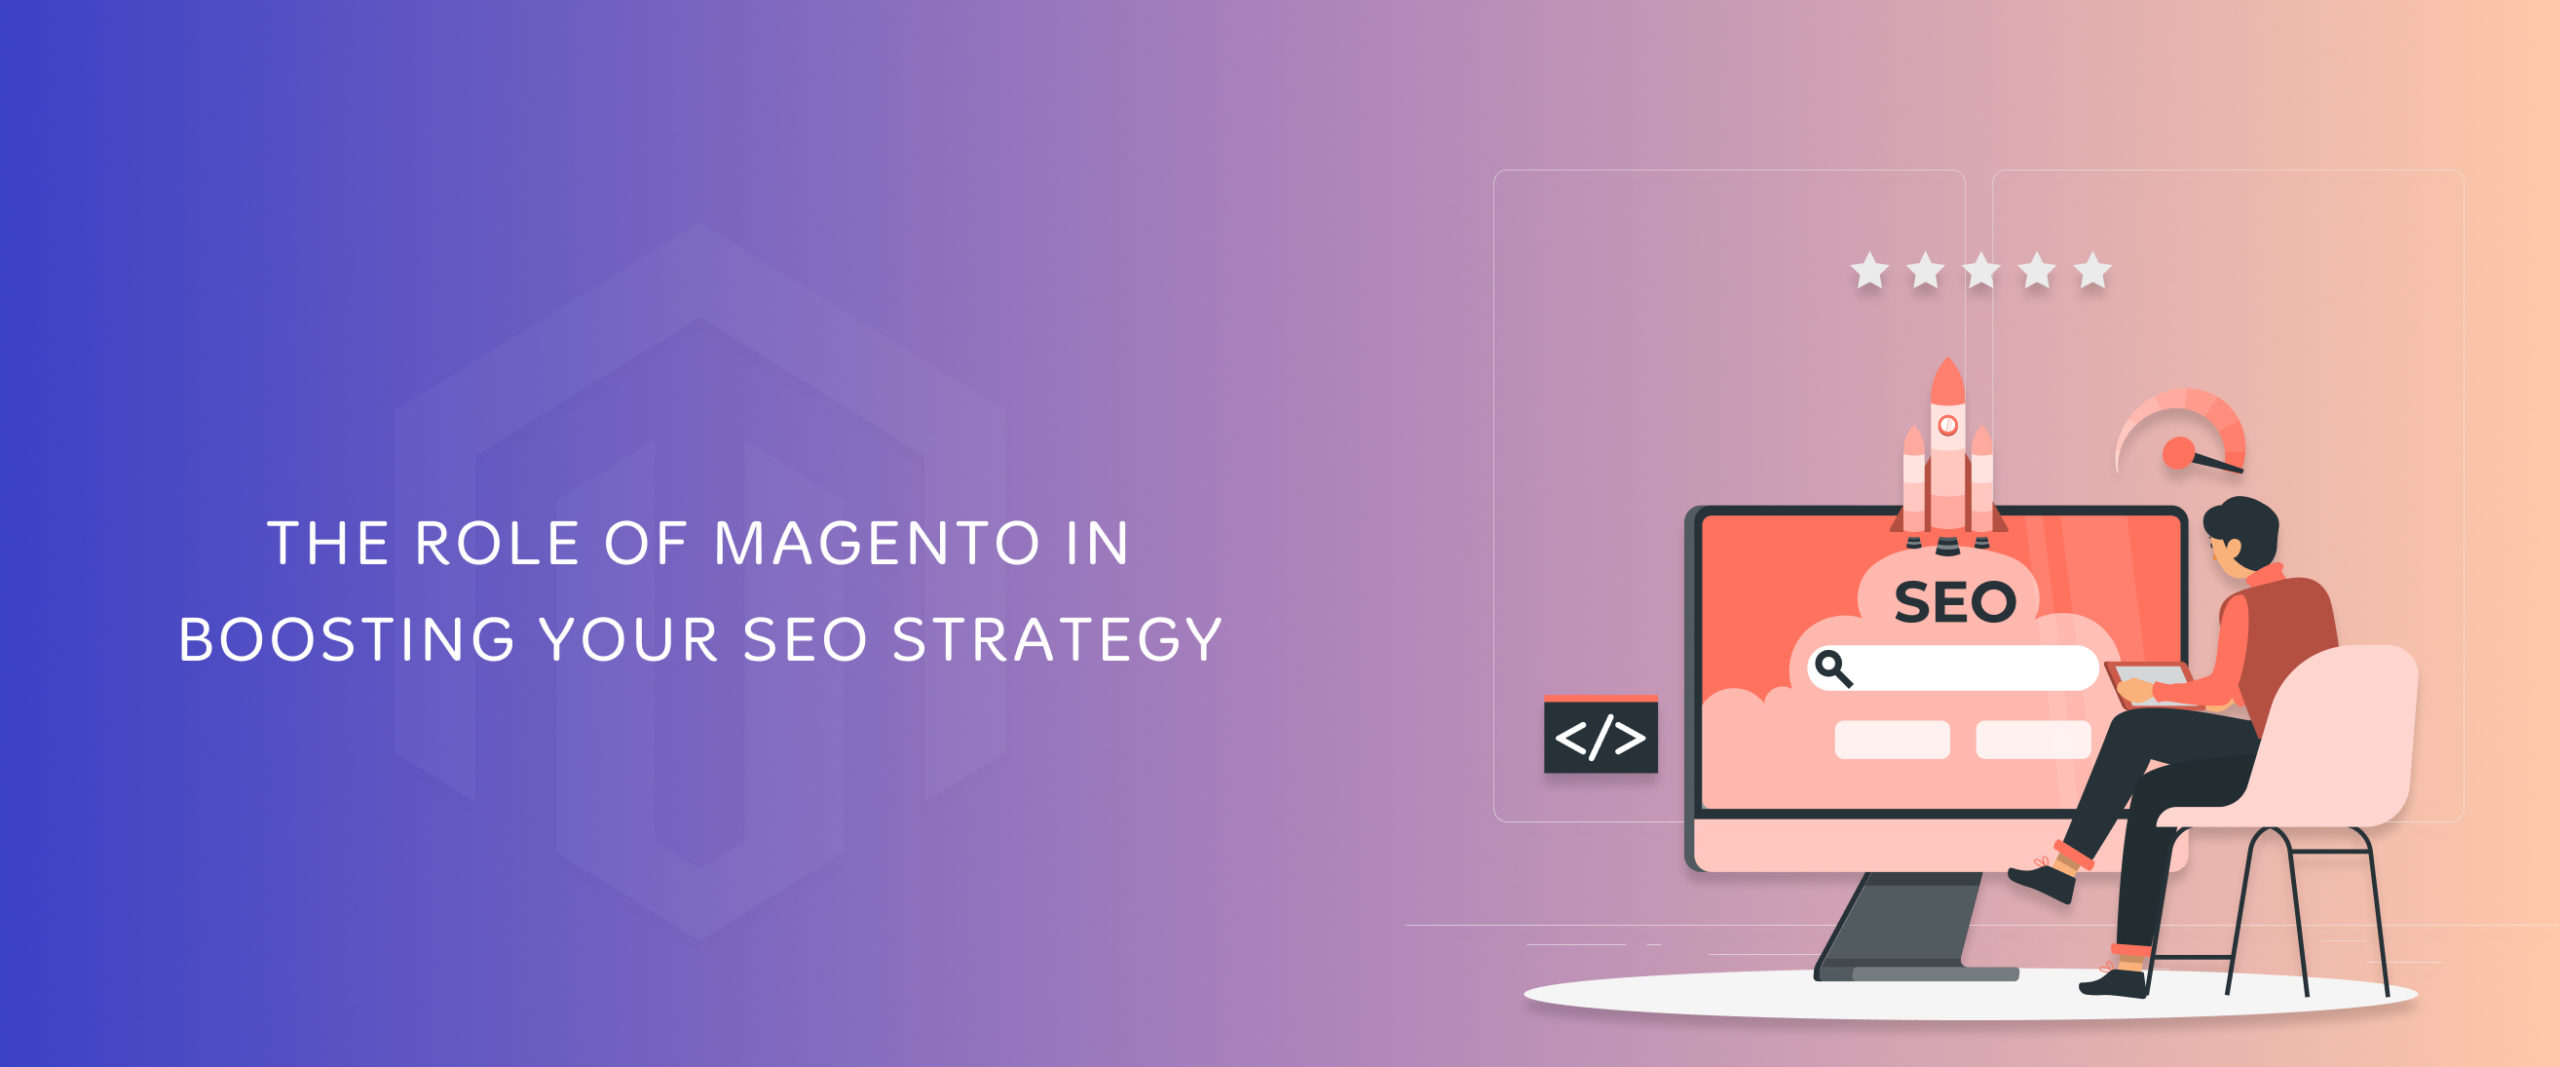 The Role of Magento in Boosting Your SEO Strategy